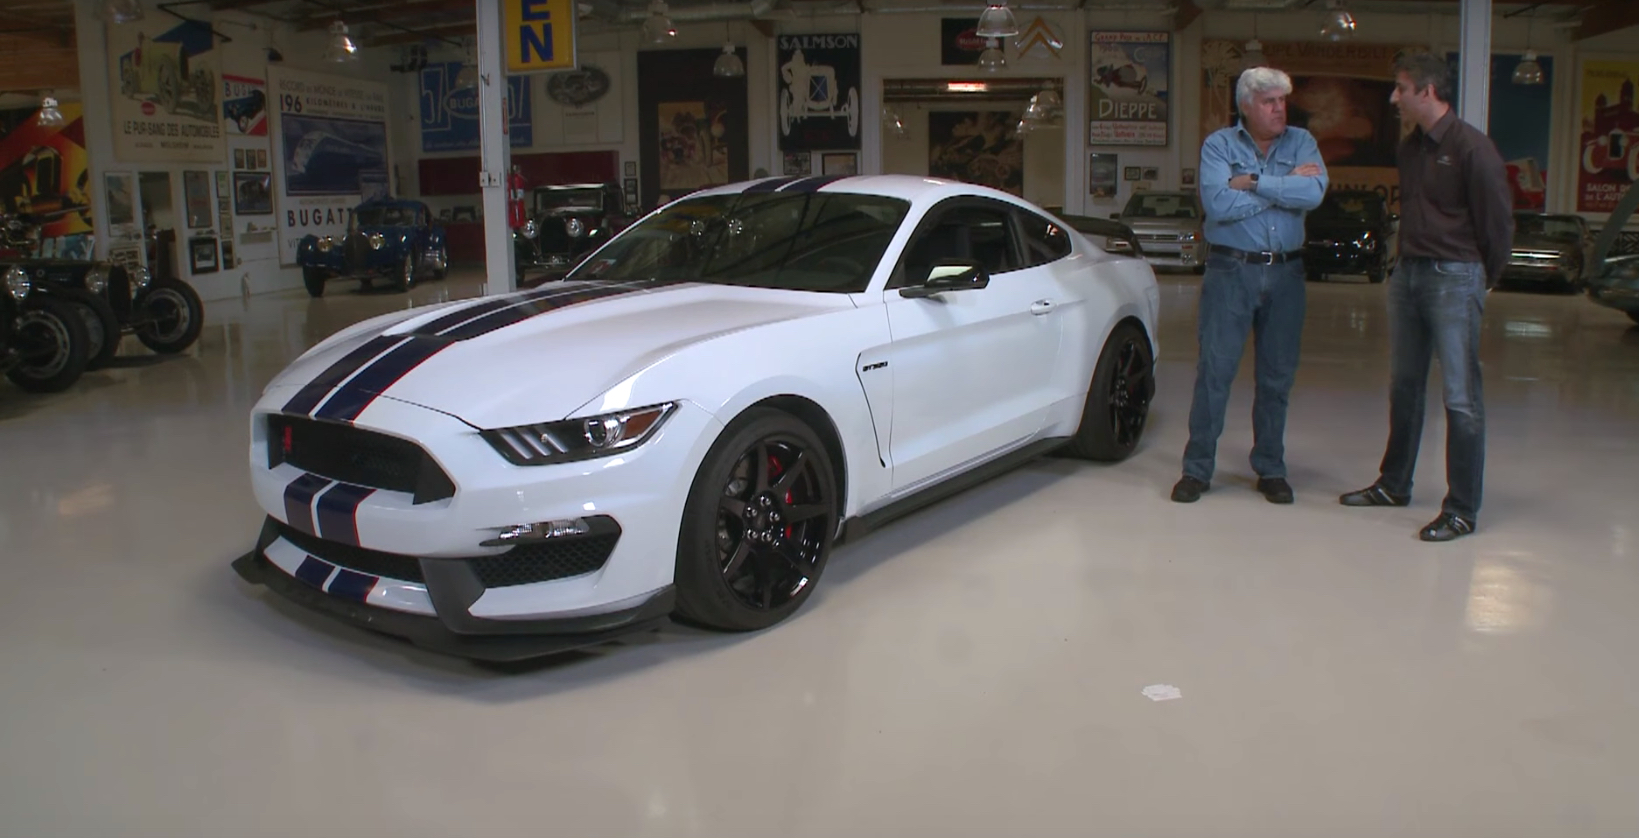 jay-leno-drives-the-greatest-mustang-ever-built-104152_1